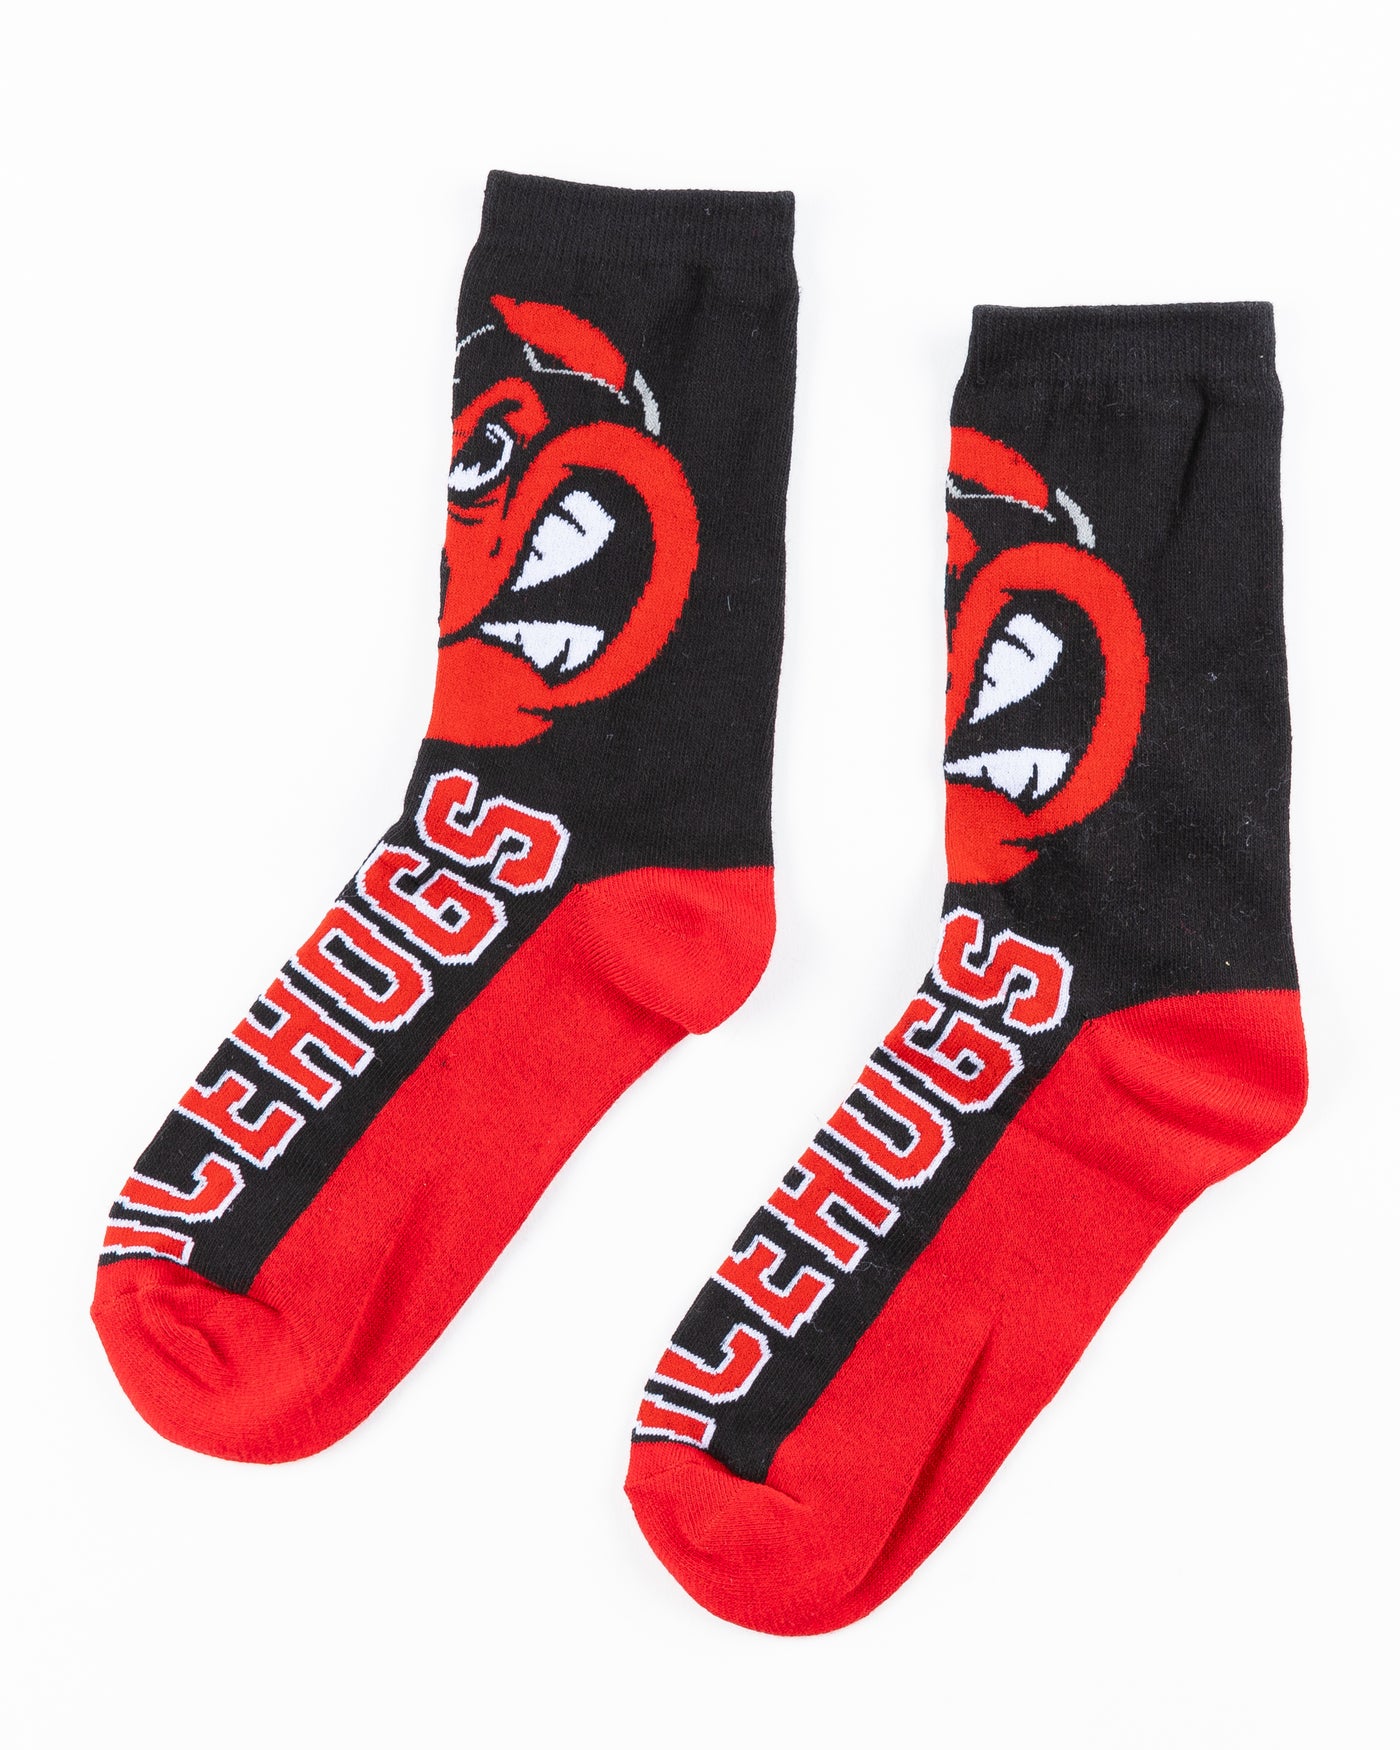 black and red Rockford IceHogs socks - front lay flat